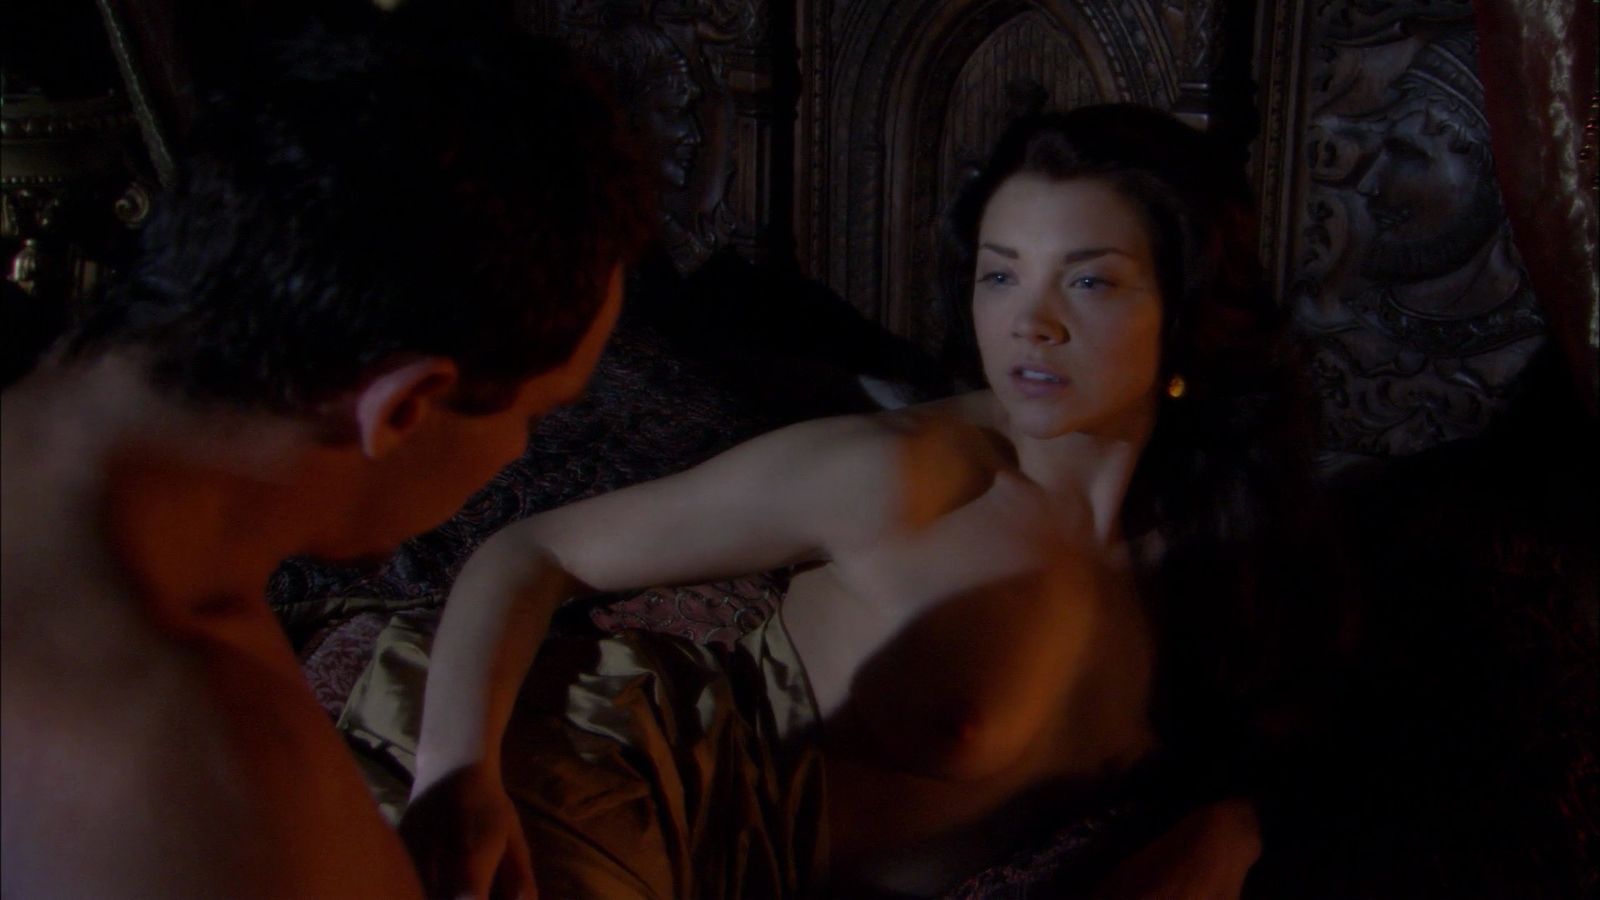 1600px x 900px - Natalie Dormer nude in The Tudors. Rating = Unrated